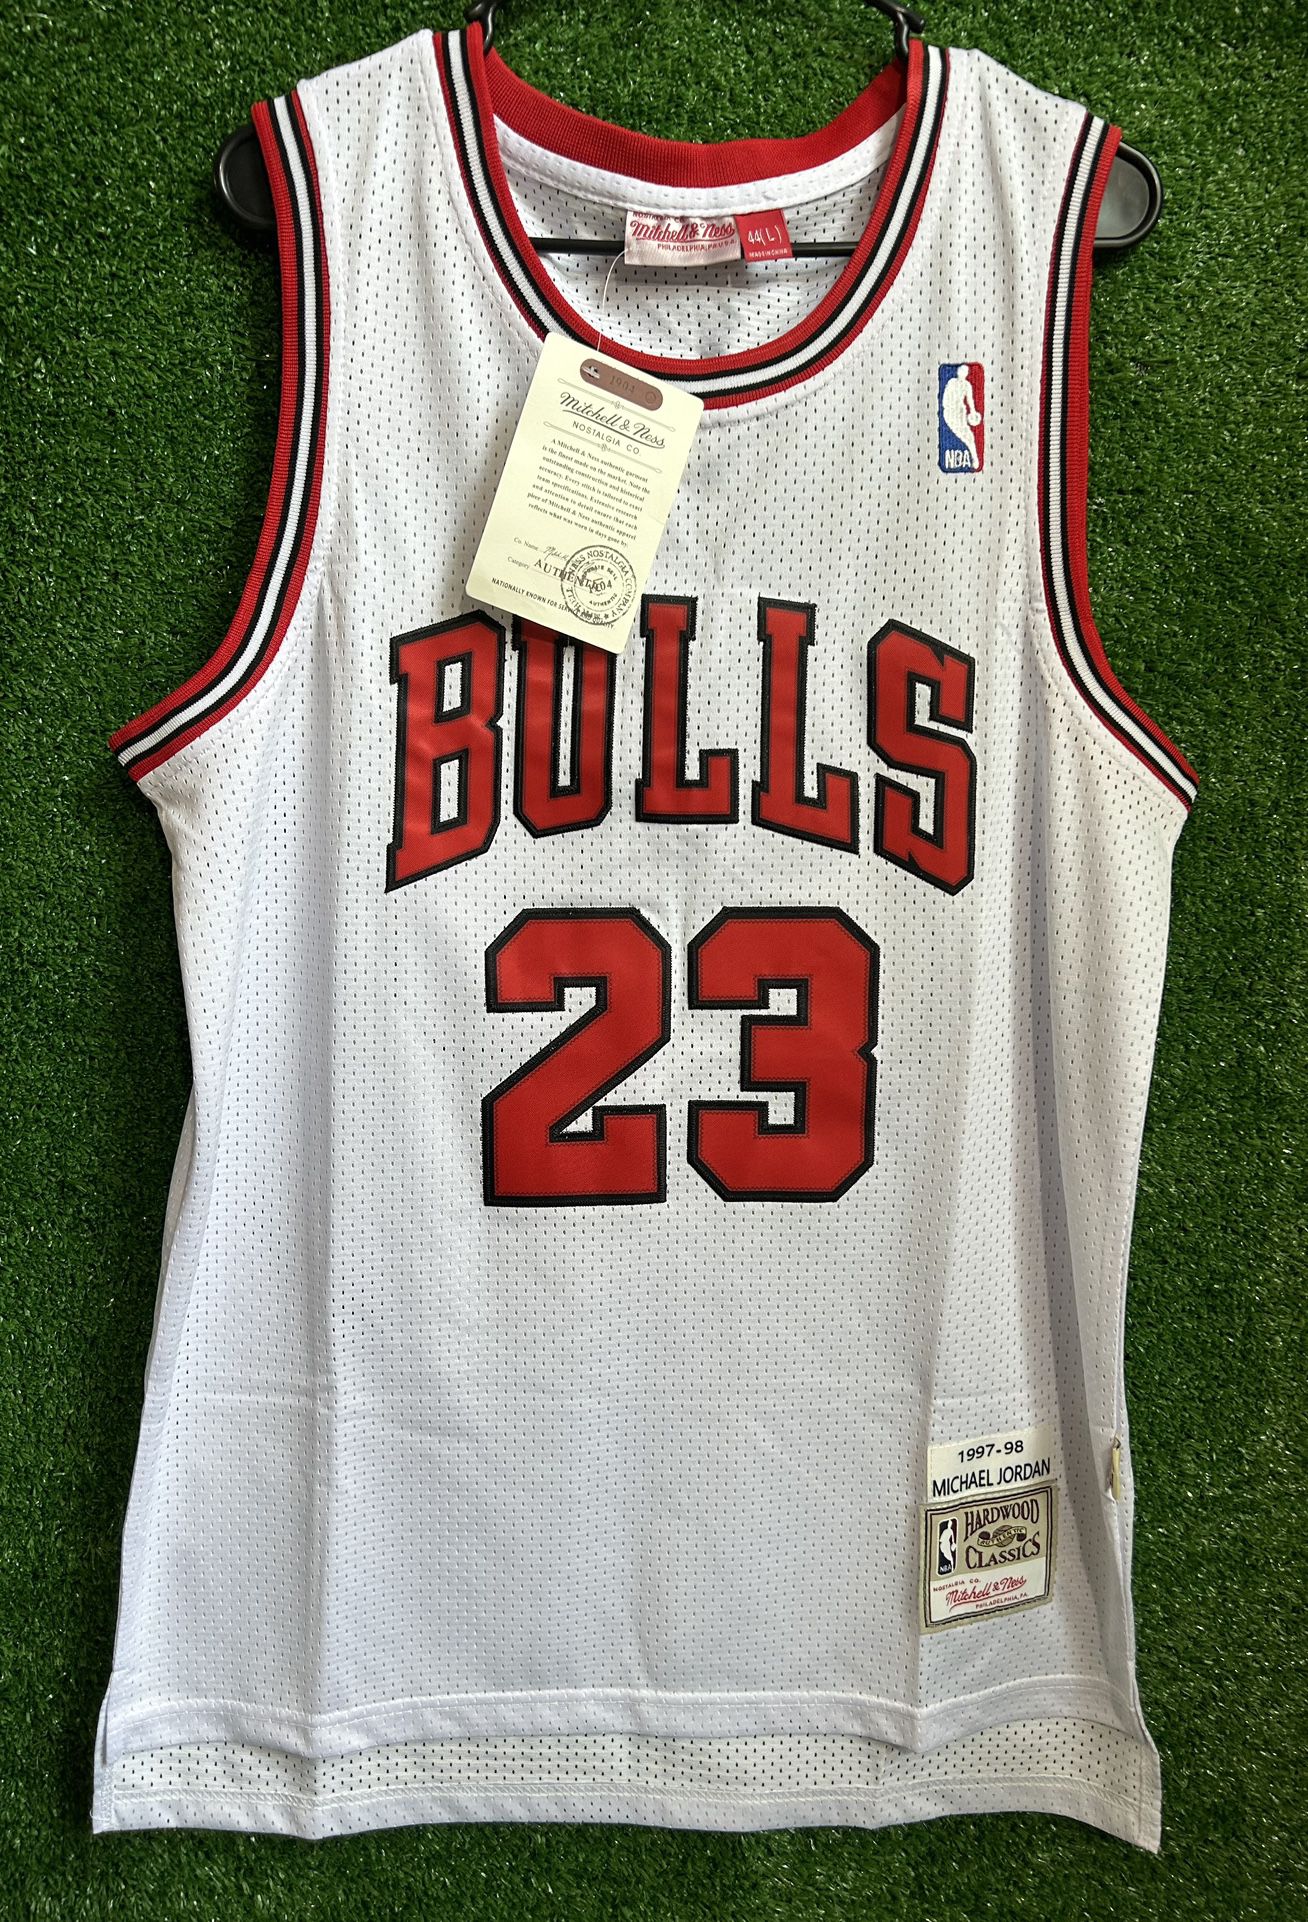 MICHAEL JORDAN CHICAGO BULLS MITCHELL & NESS JERSEY BRAND NEW WITH TAGS SIZES LARGE AND XL AVAILABLE